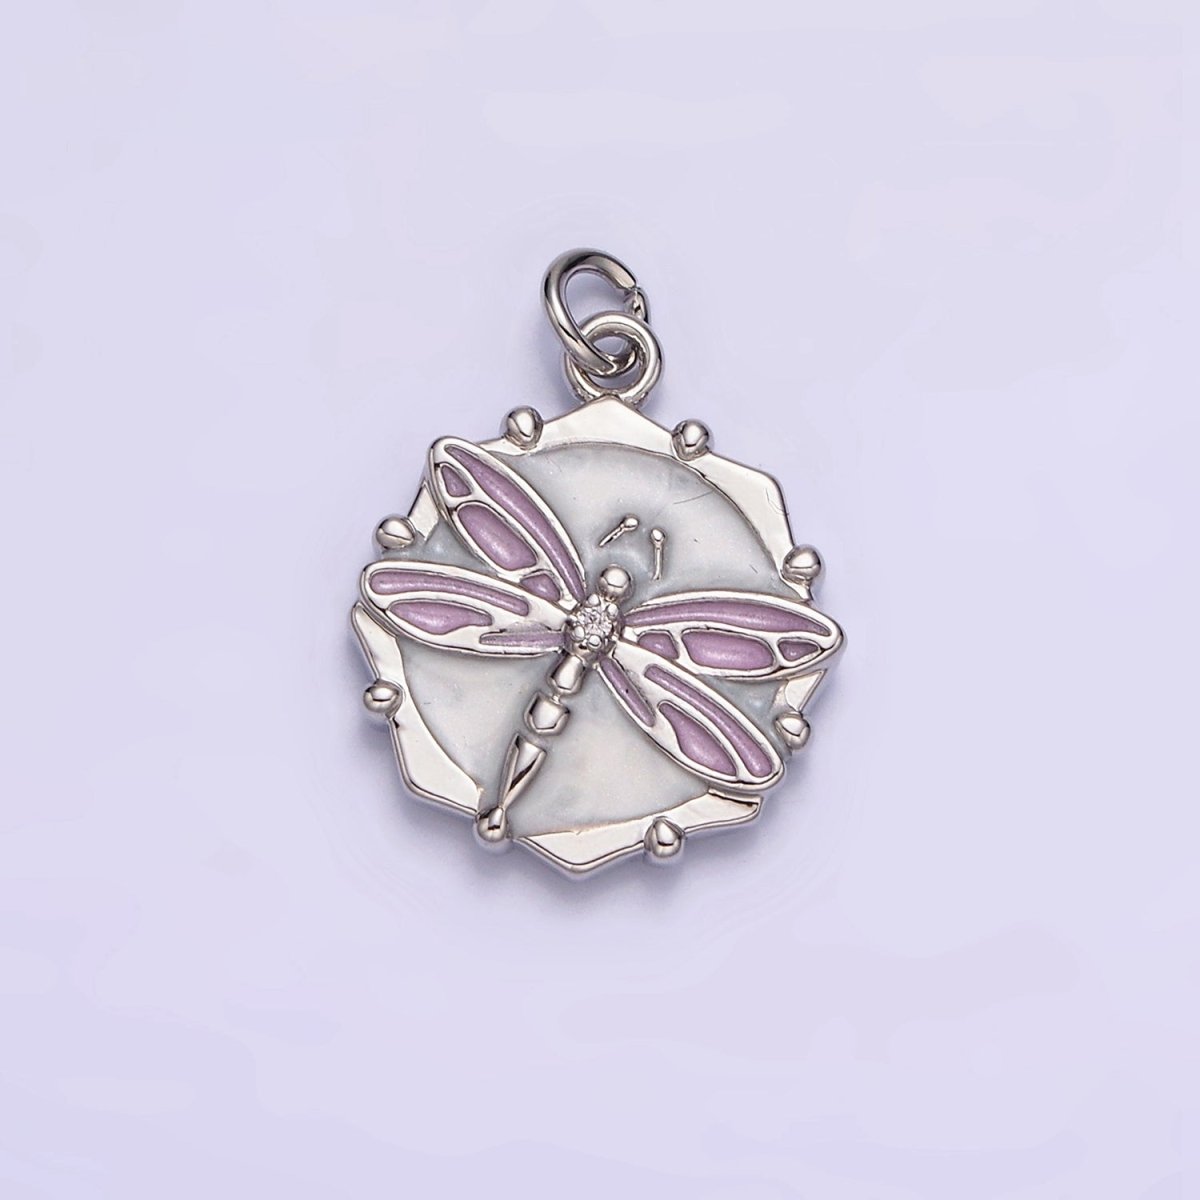 16K Gold Filled Dragonfly Insect White, Pink, Blue Sparkly Enamel Hexagonal Charm | AC1555 - AC1560 - DLUXCA